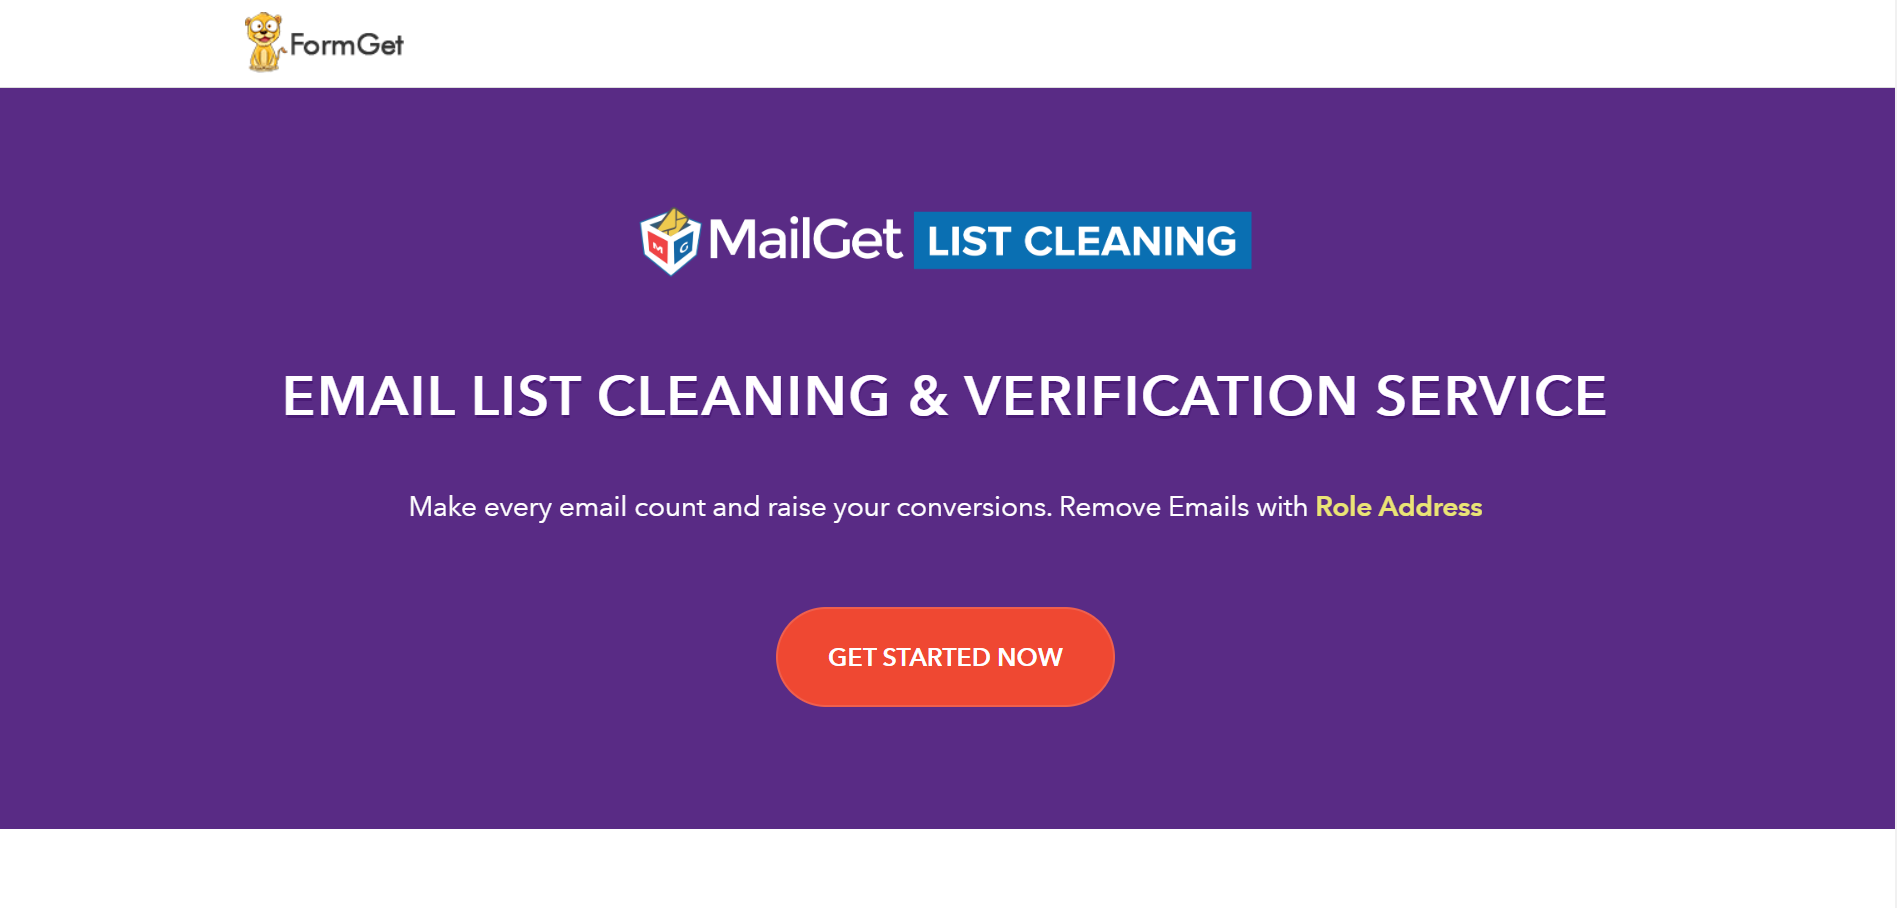 MailGet List Cleaning tool